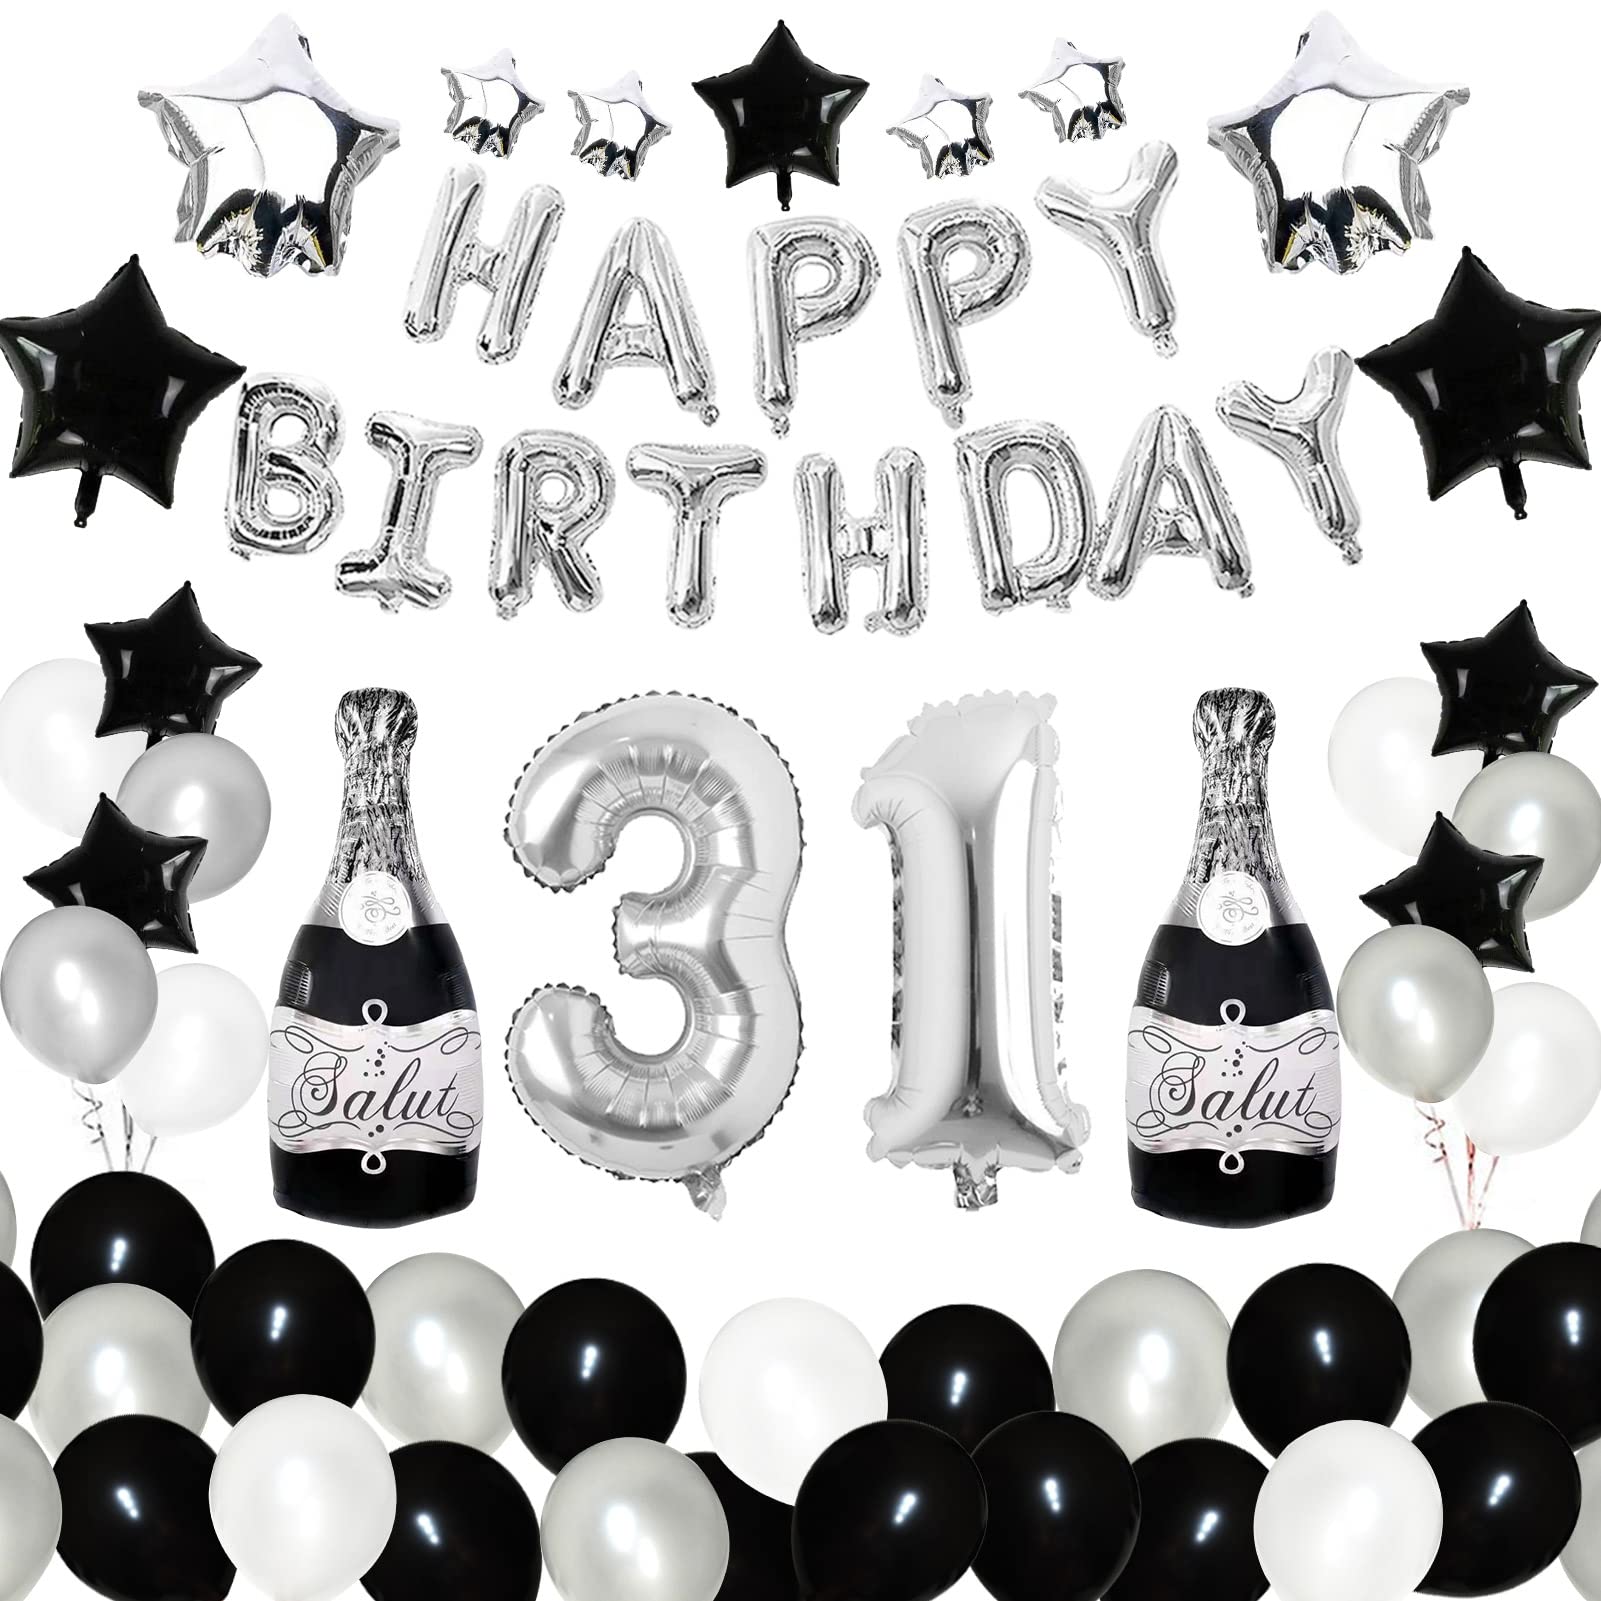 Miidenks 31st Birthday Party Decorations for Men Black and White, Happy 31 Birthday  Party Decor Supplies.